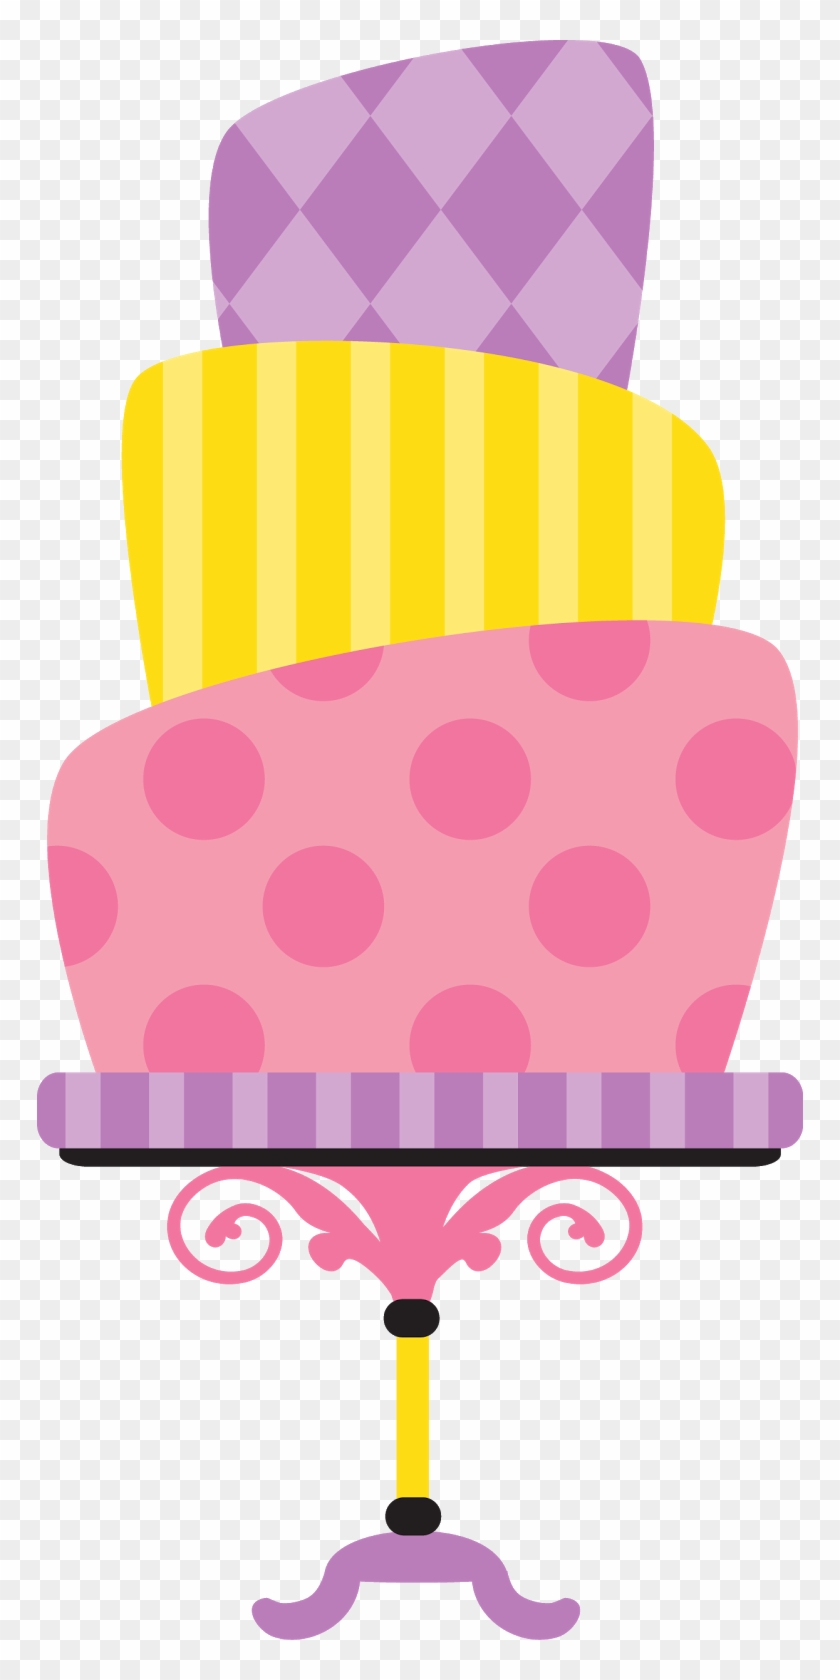 Birthday Cake Party Paper Clip Art - Birthday Cake Party Paper Clip Art #555531